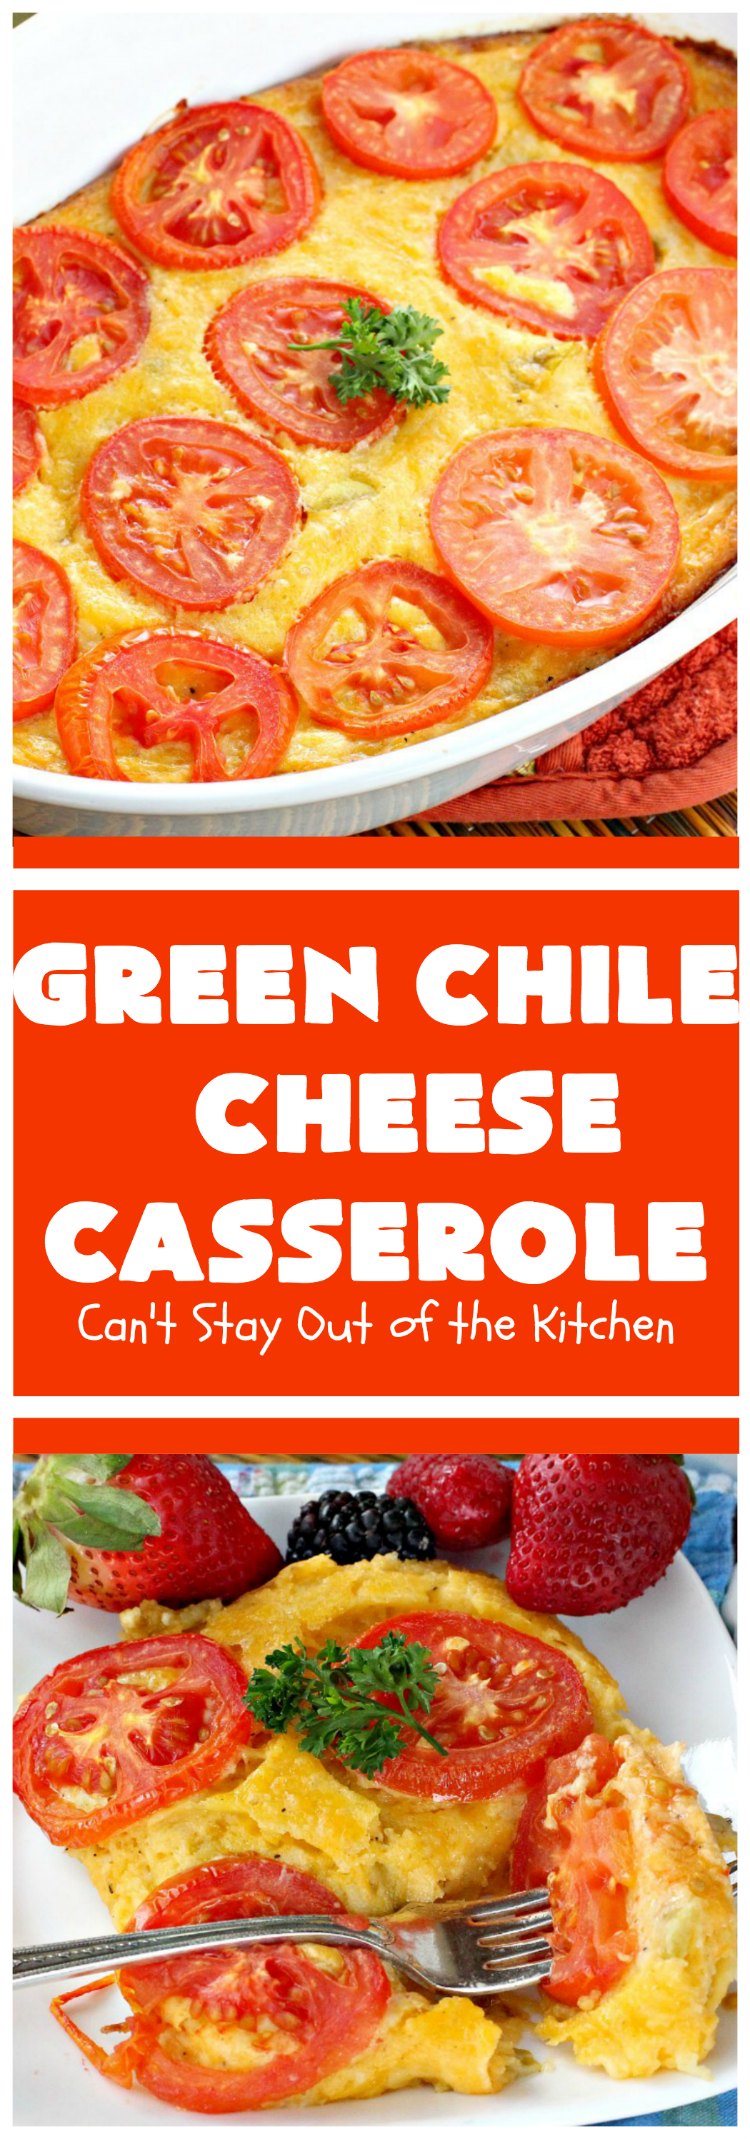 Green Chile Cheese Casserole | Can't Stay Out of the Kitchen